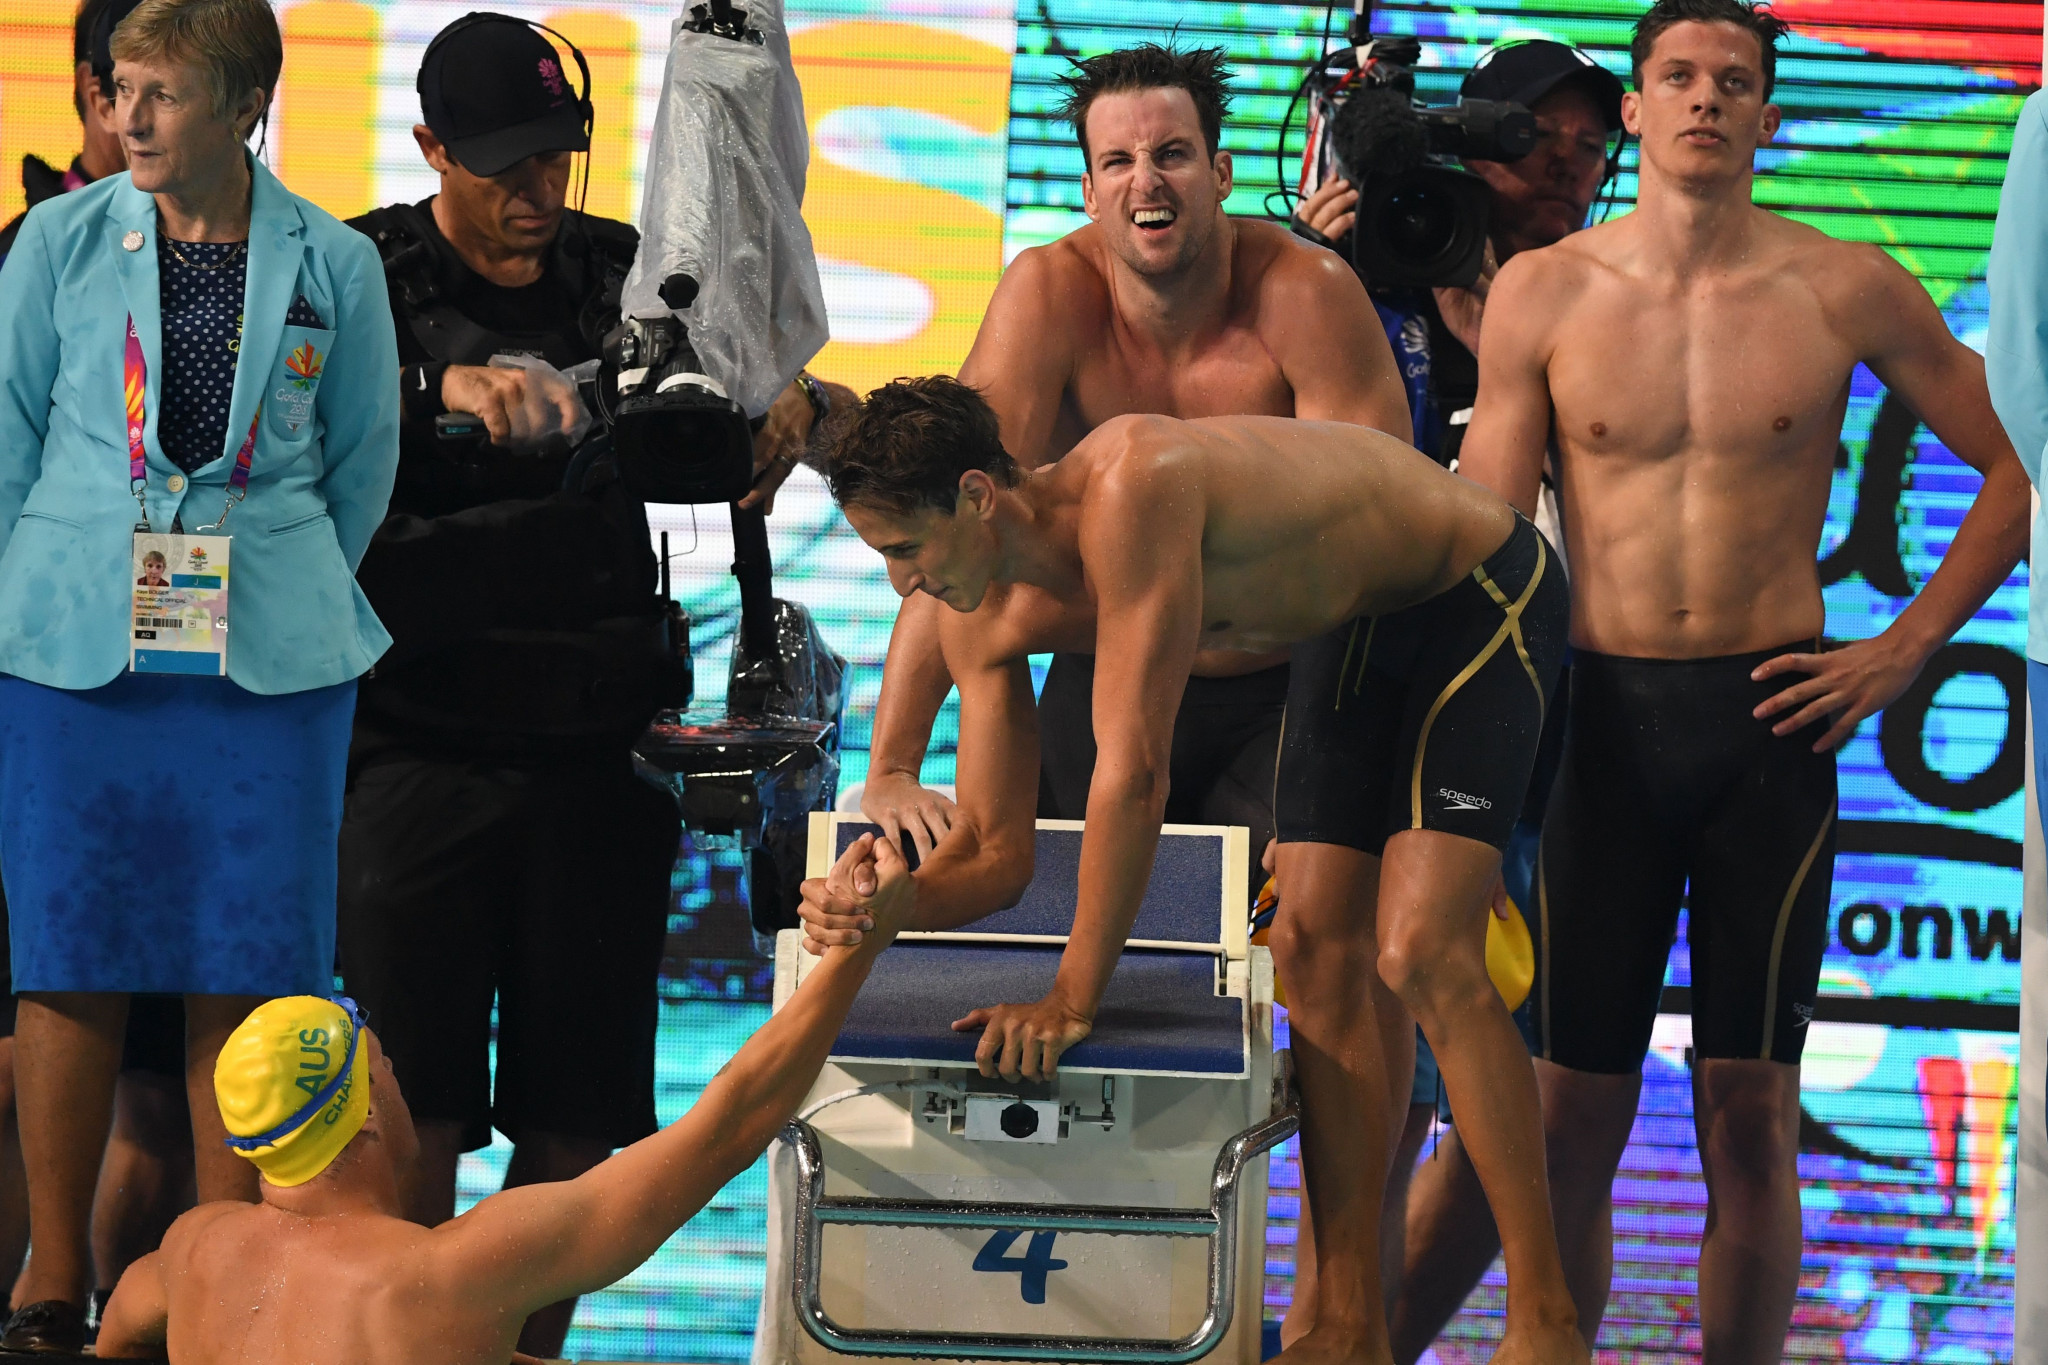 Hosts Australia move to top of medal table after dominating swimming events on day two of Gold Coast 2018